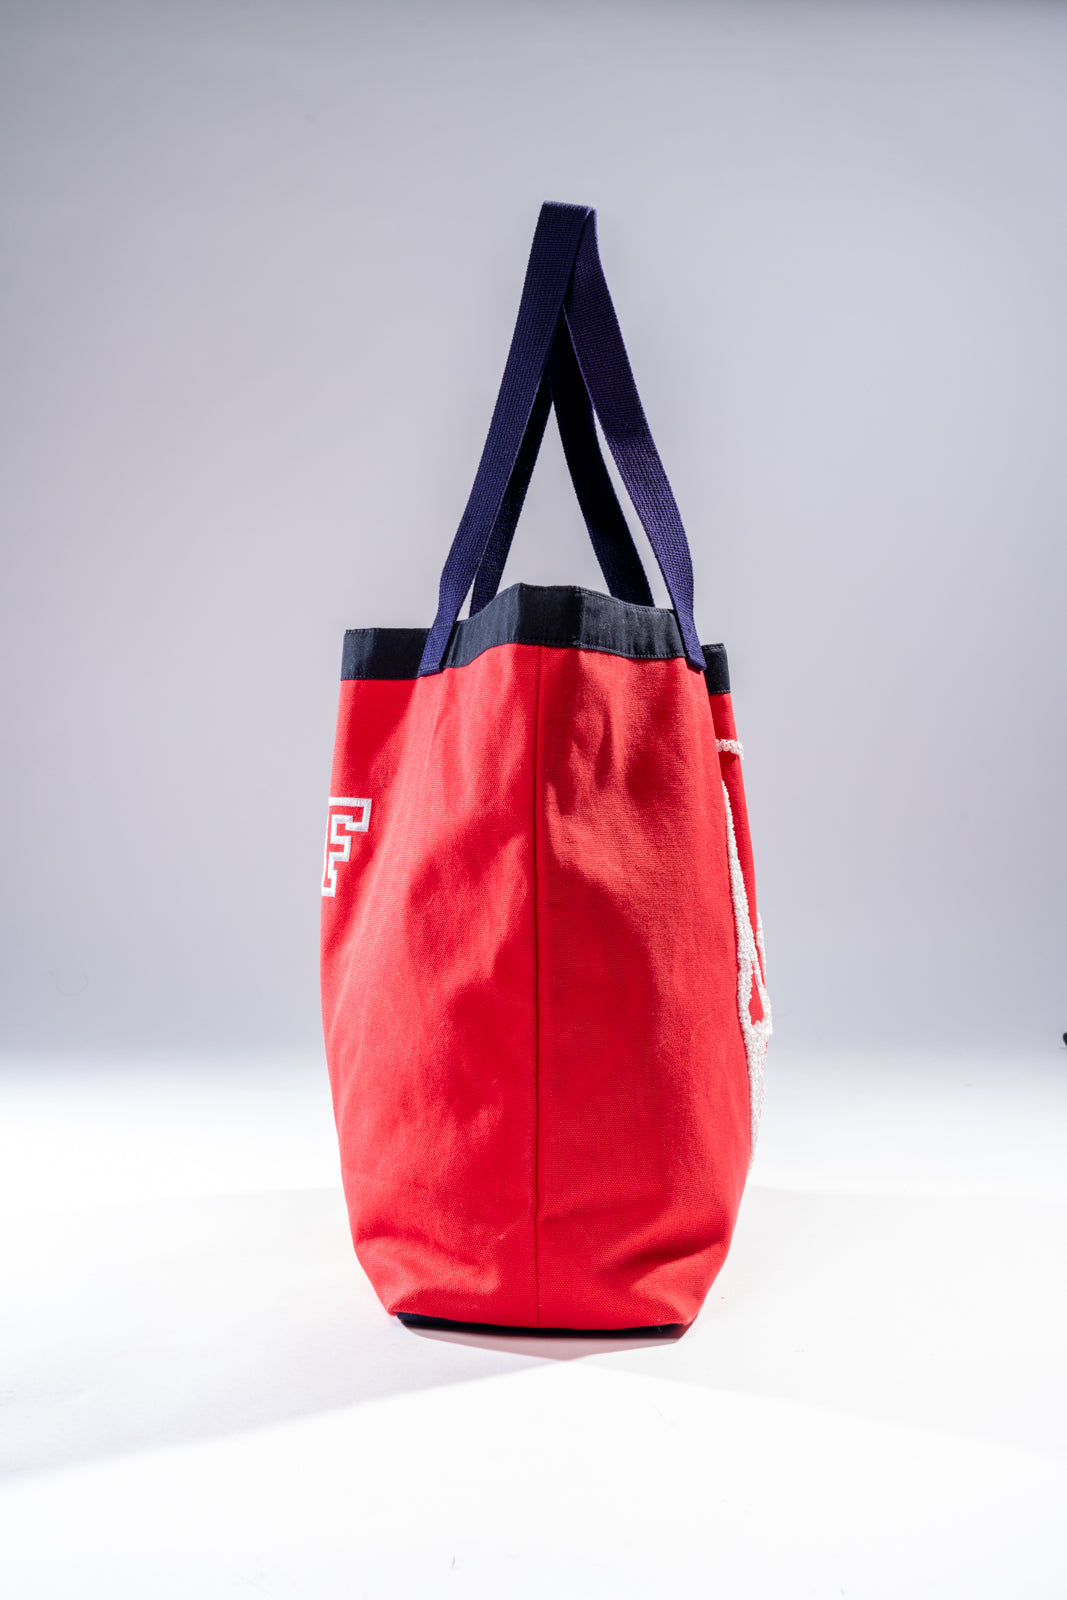 Red Canvas Skull Tote Bag